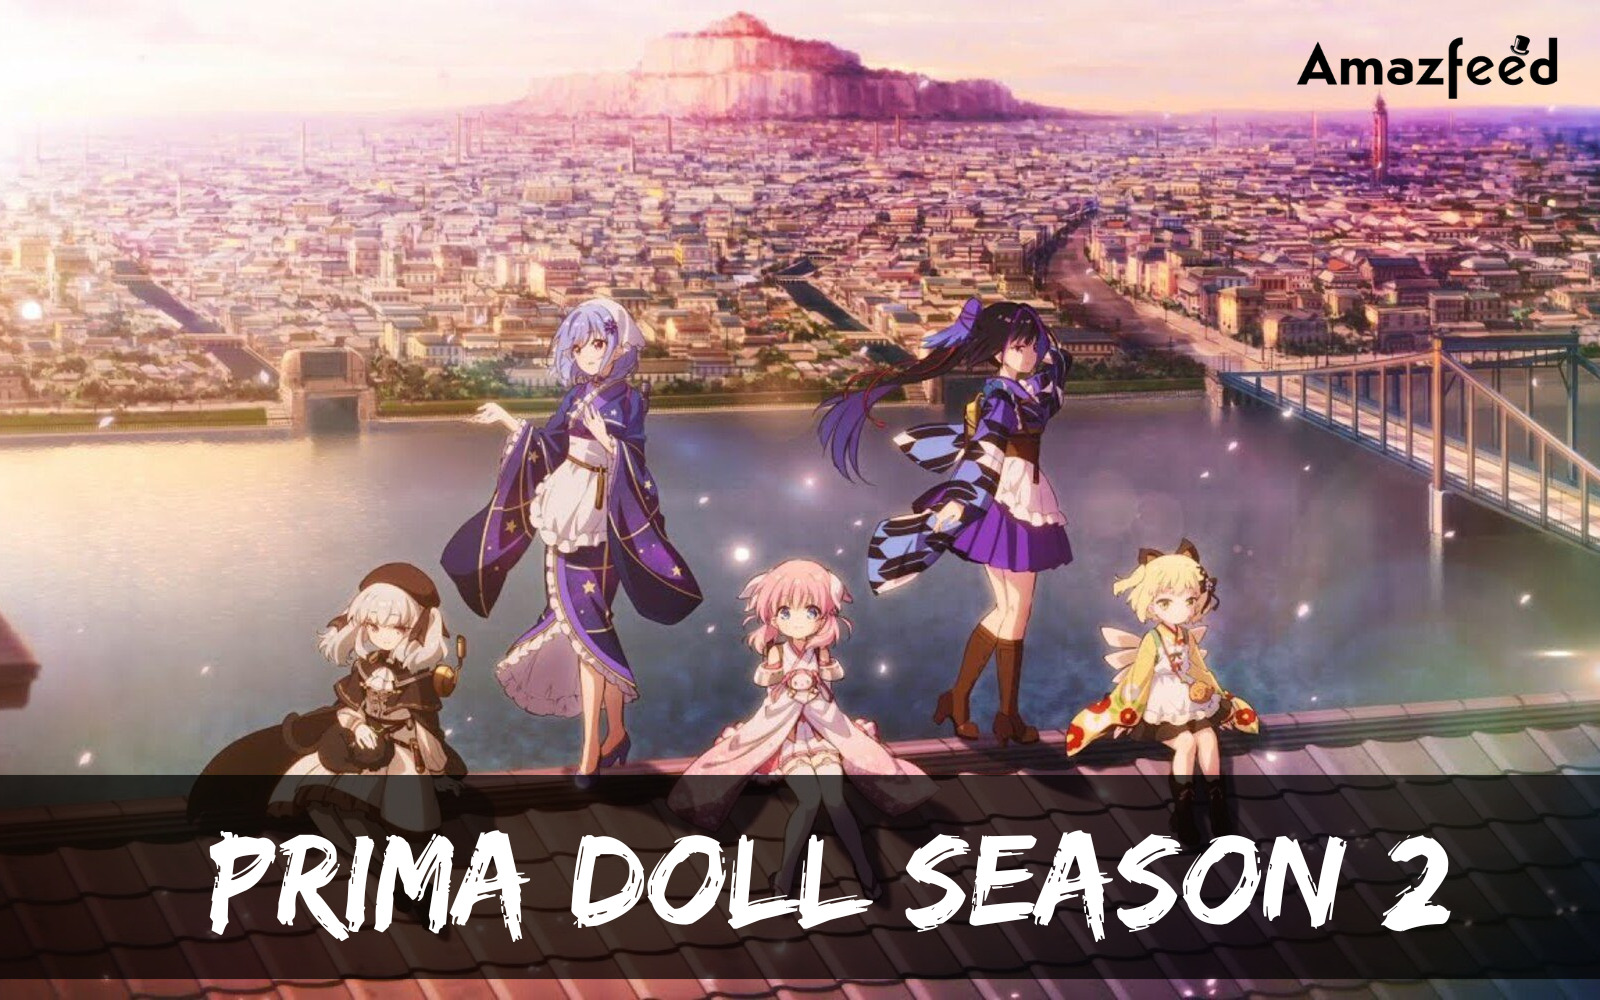 Who Will Be Part Of Prima Doll Season 2 (Cast and Character)